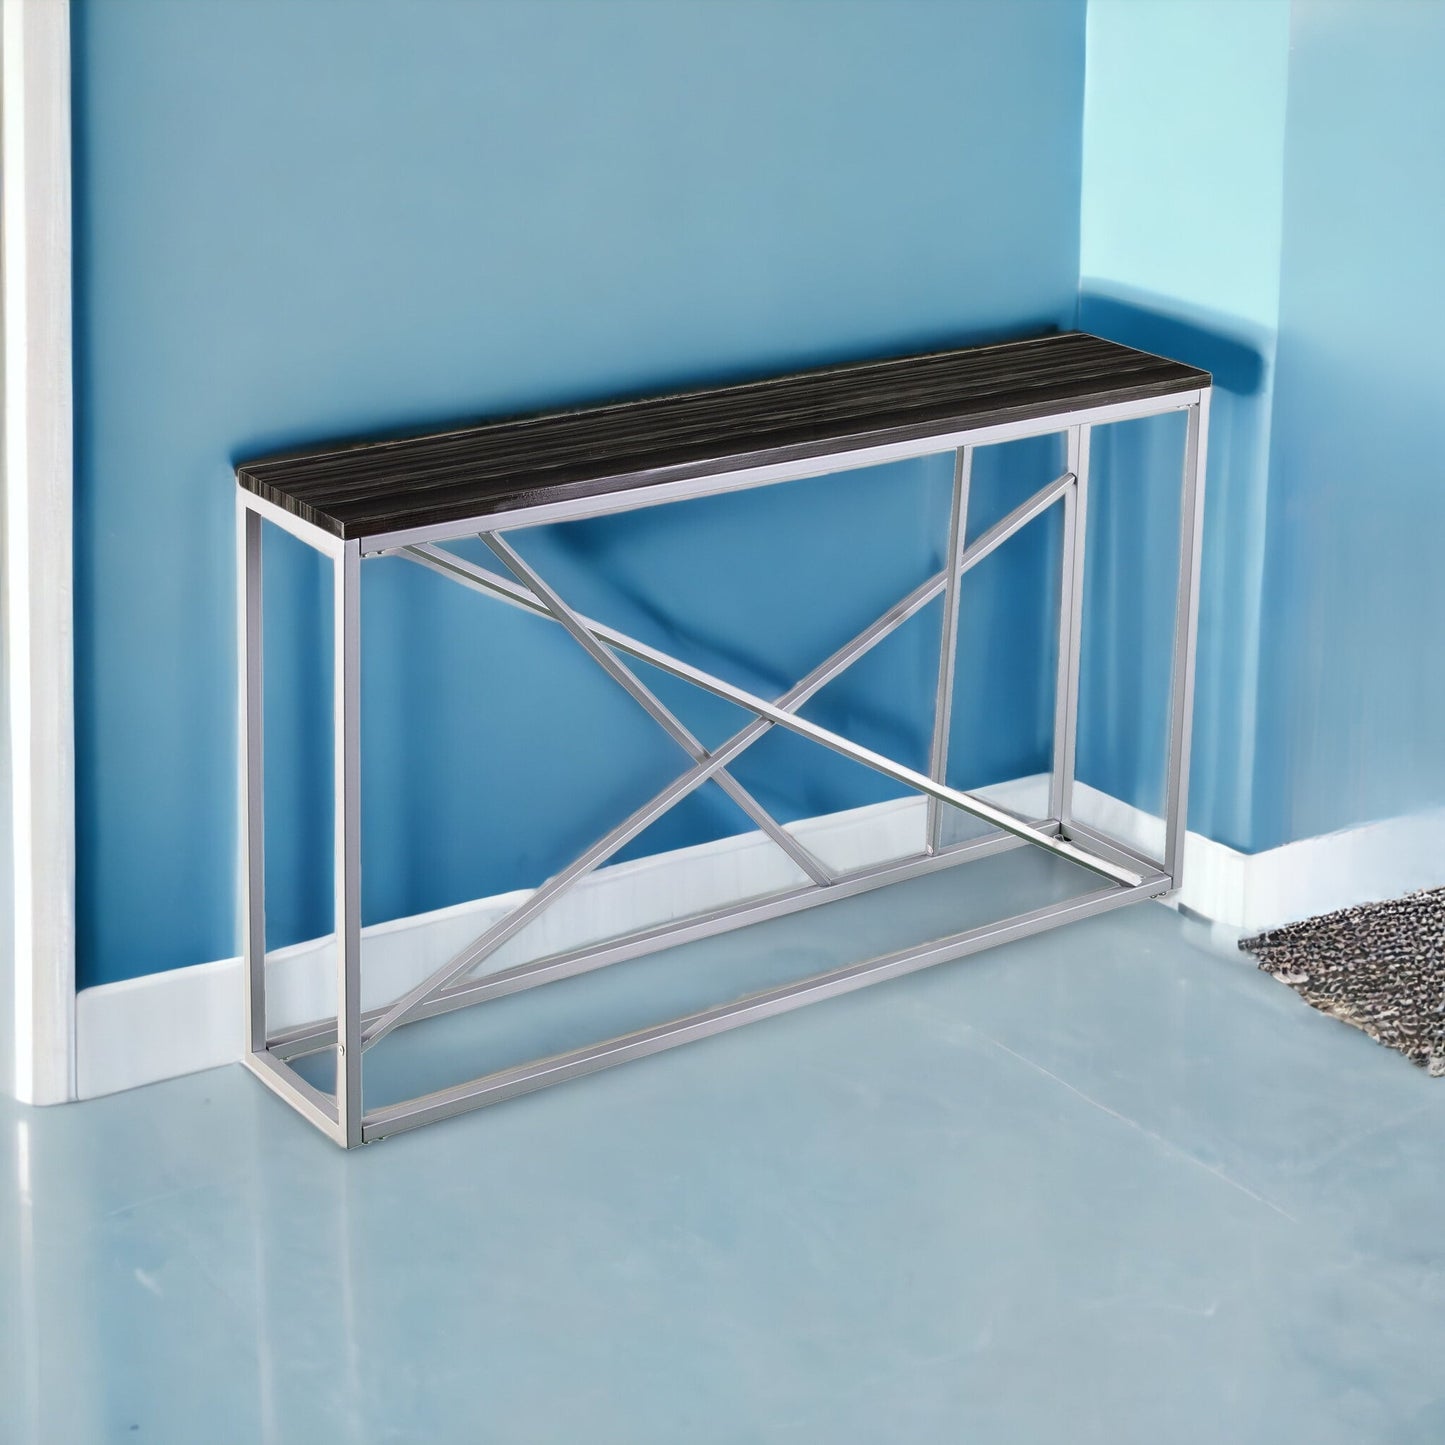 52" Black and Silver Faux Stone Frame Console Table By Homeroots